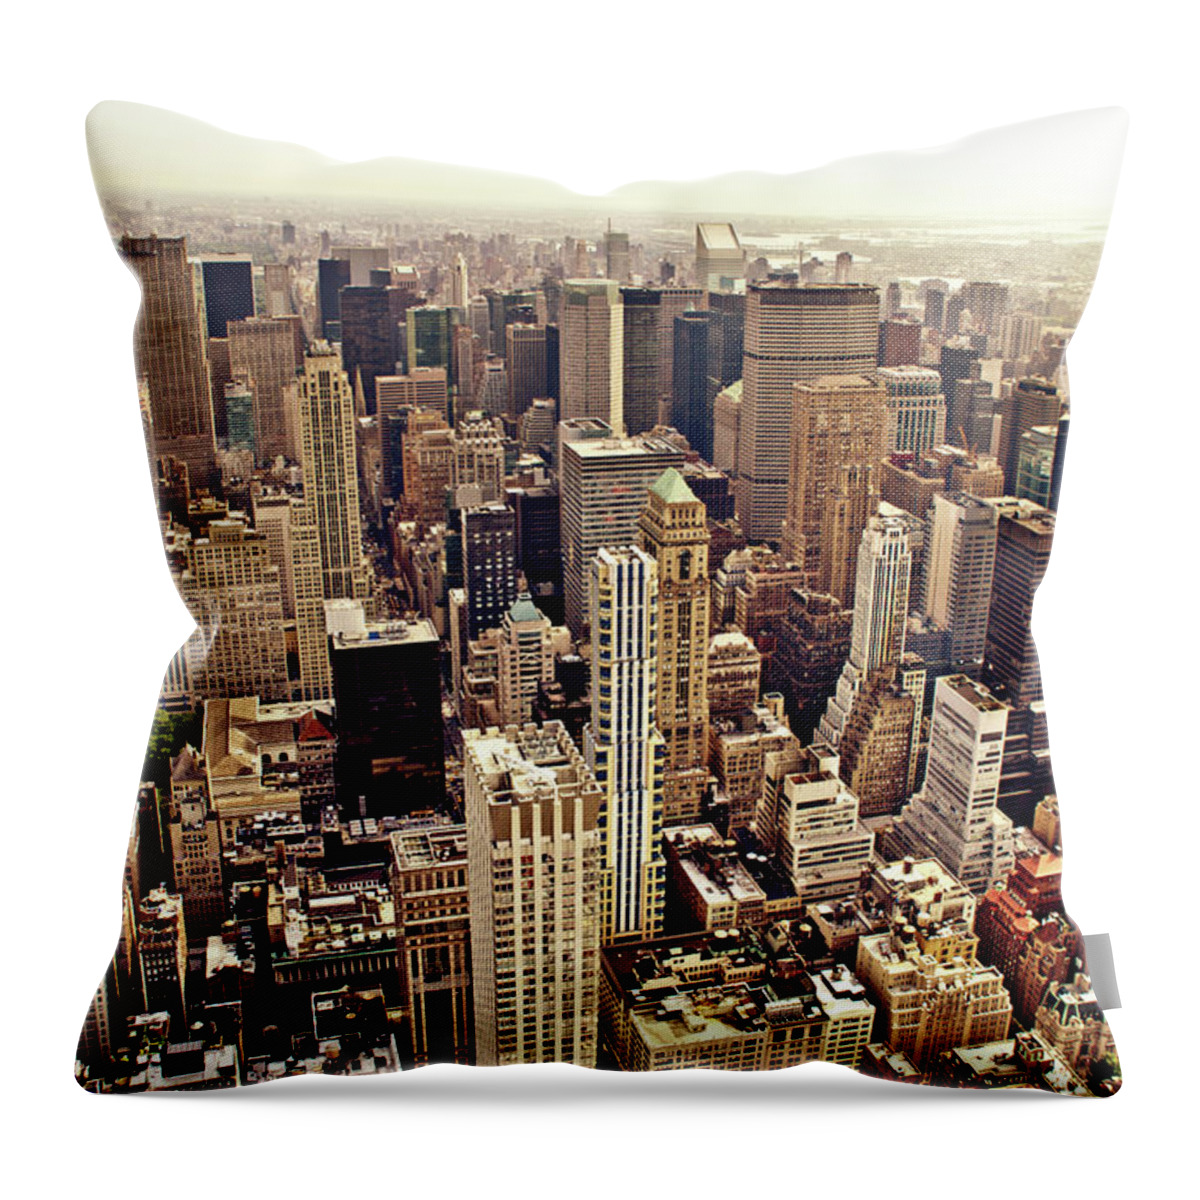 Tranquility Throw Pillow featuring the photograph New York City #6 by Vivienne Gucwa